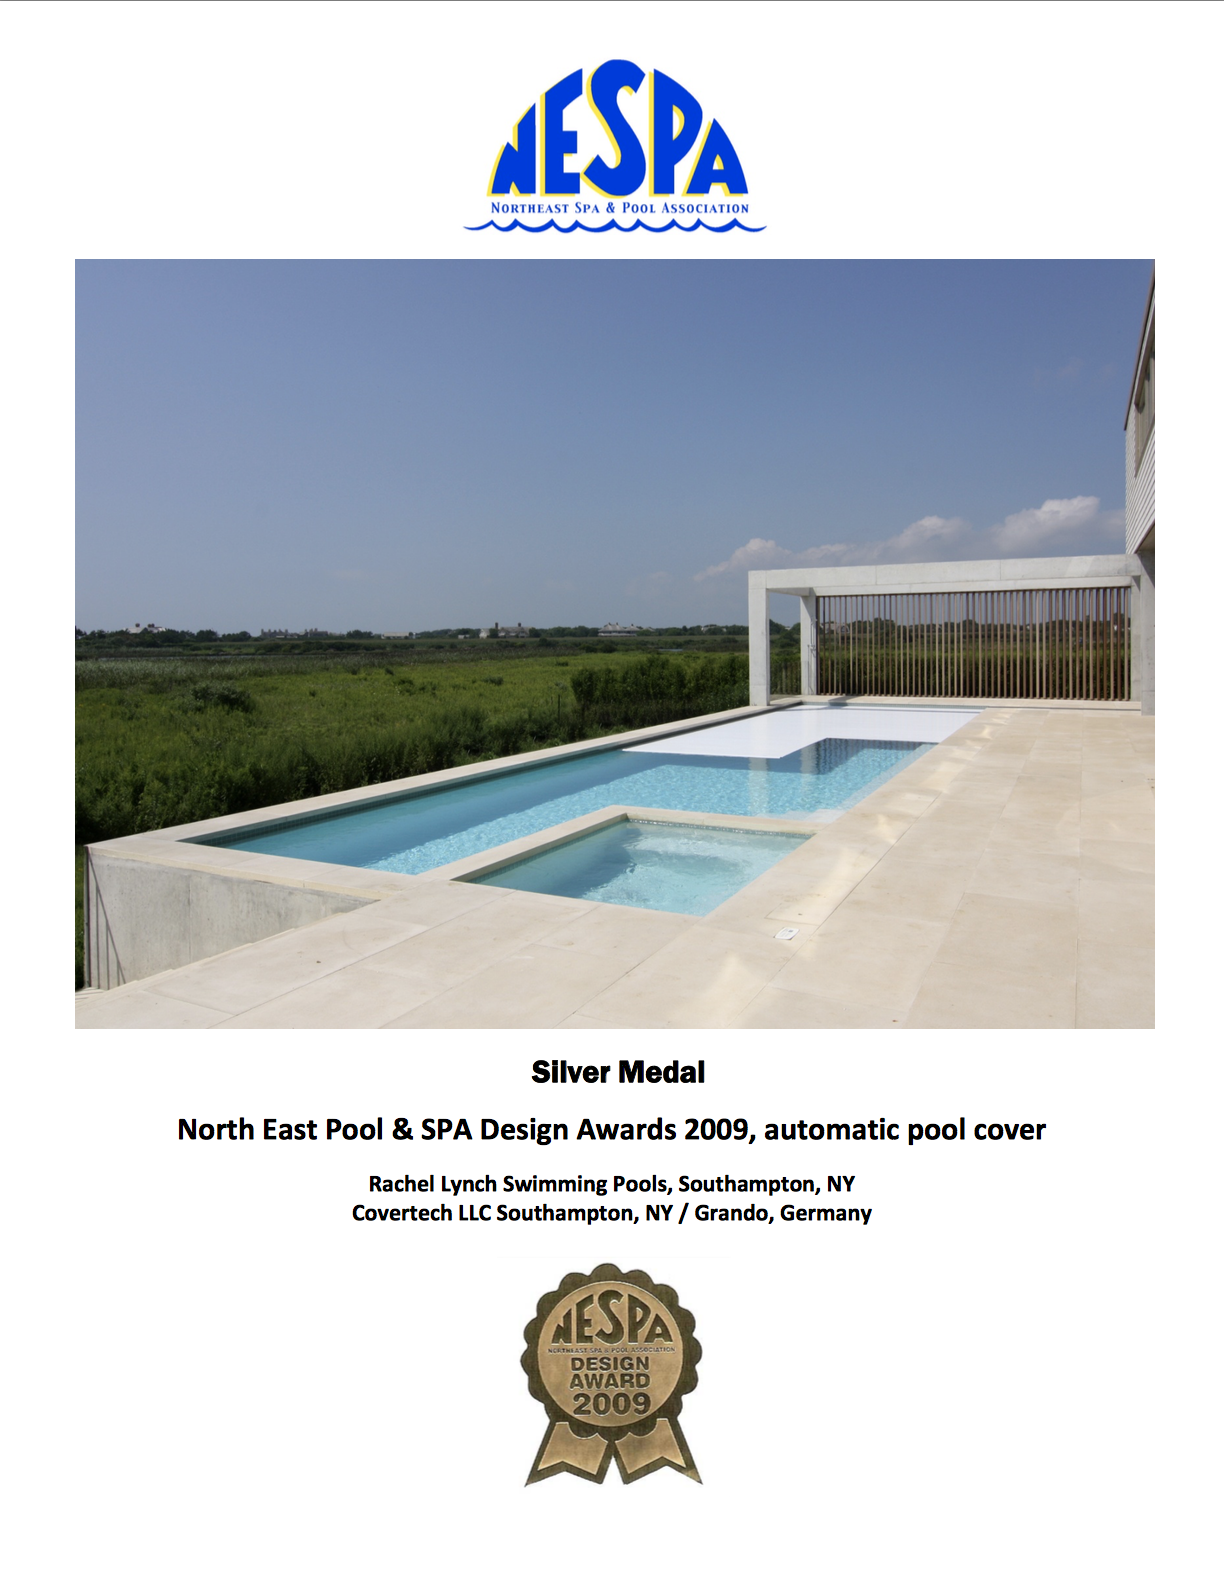 Covertech_SILVER_NESPA_Award_Res_Pools_with_automatic_pool_cover